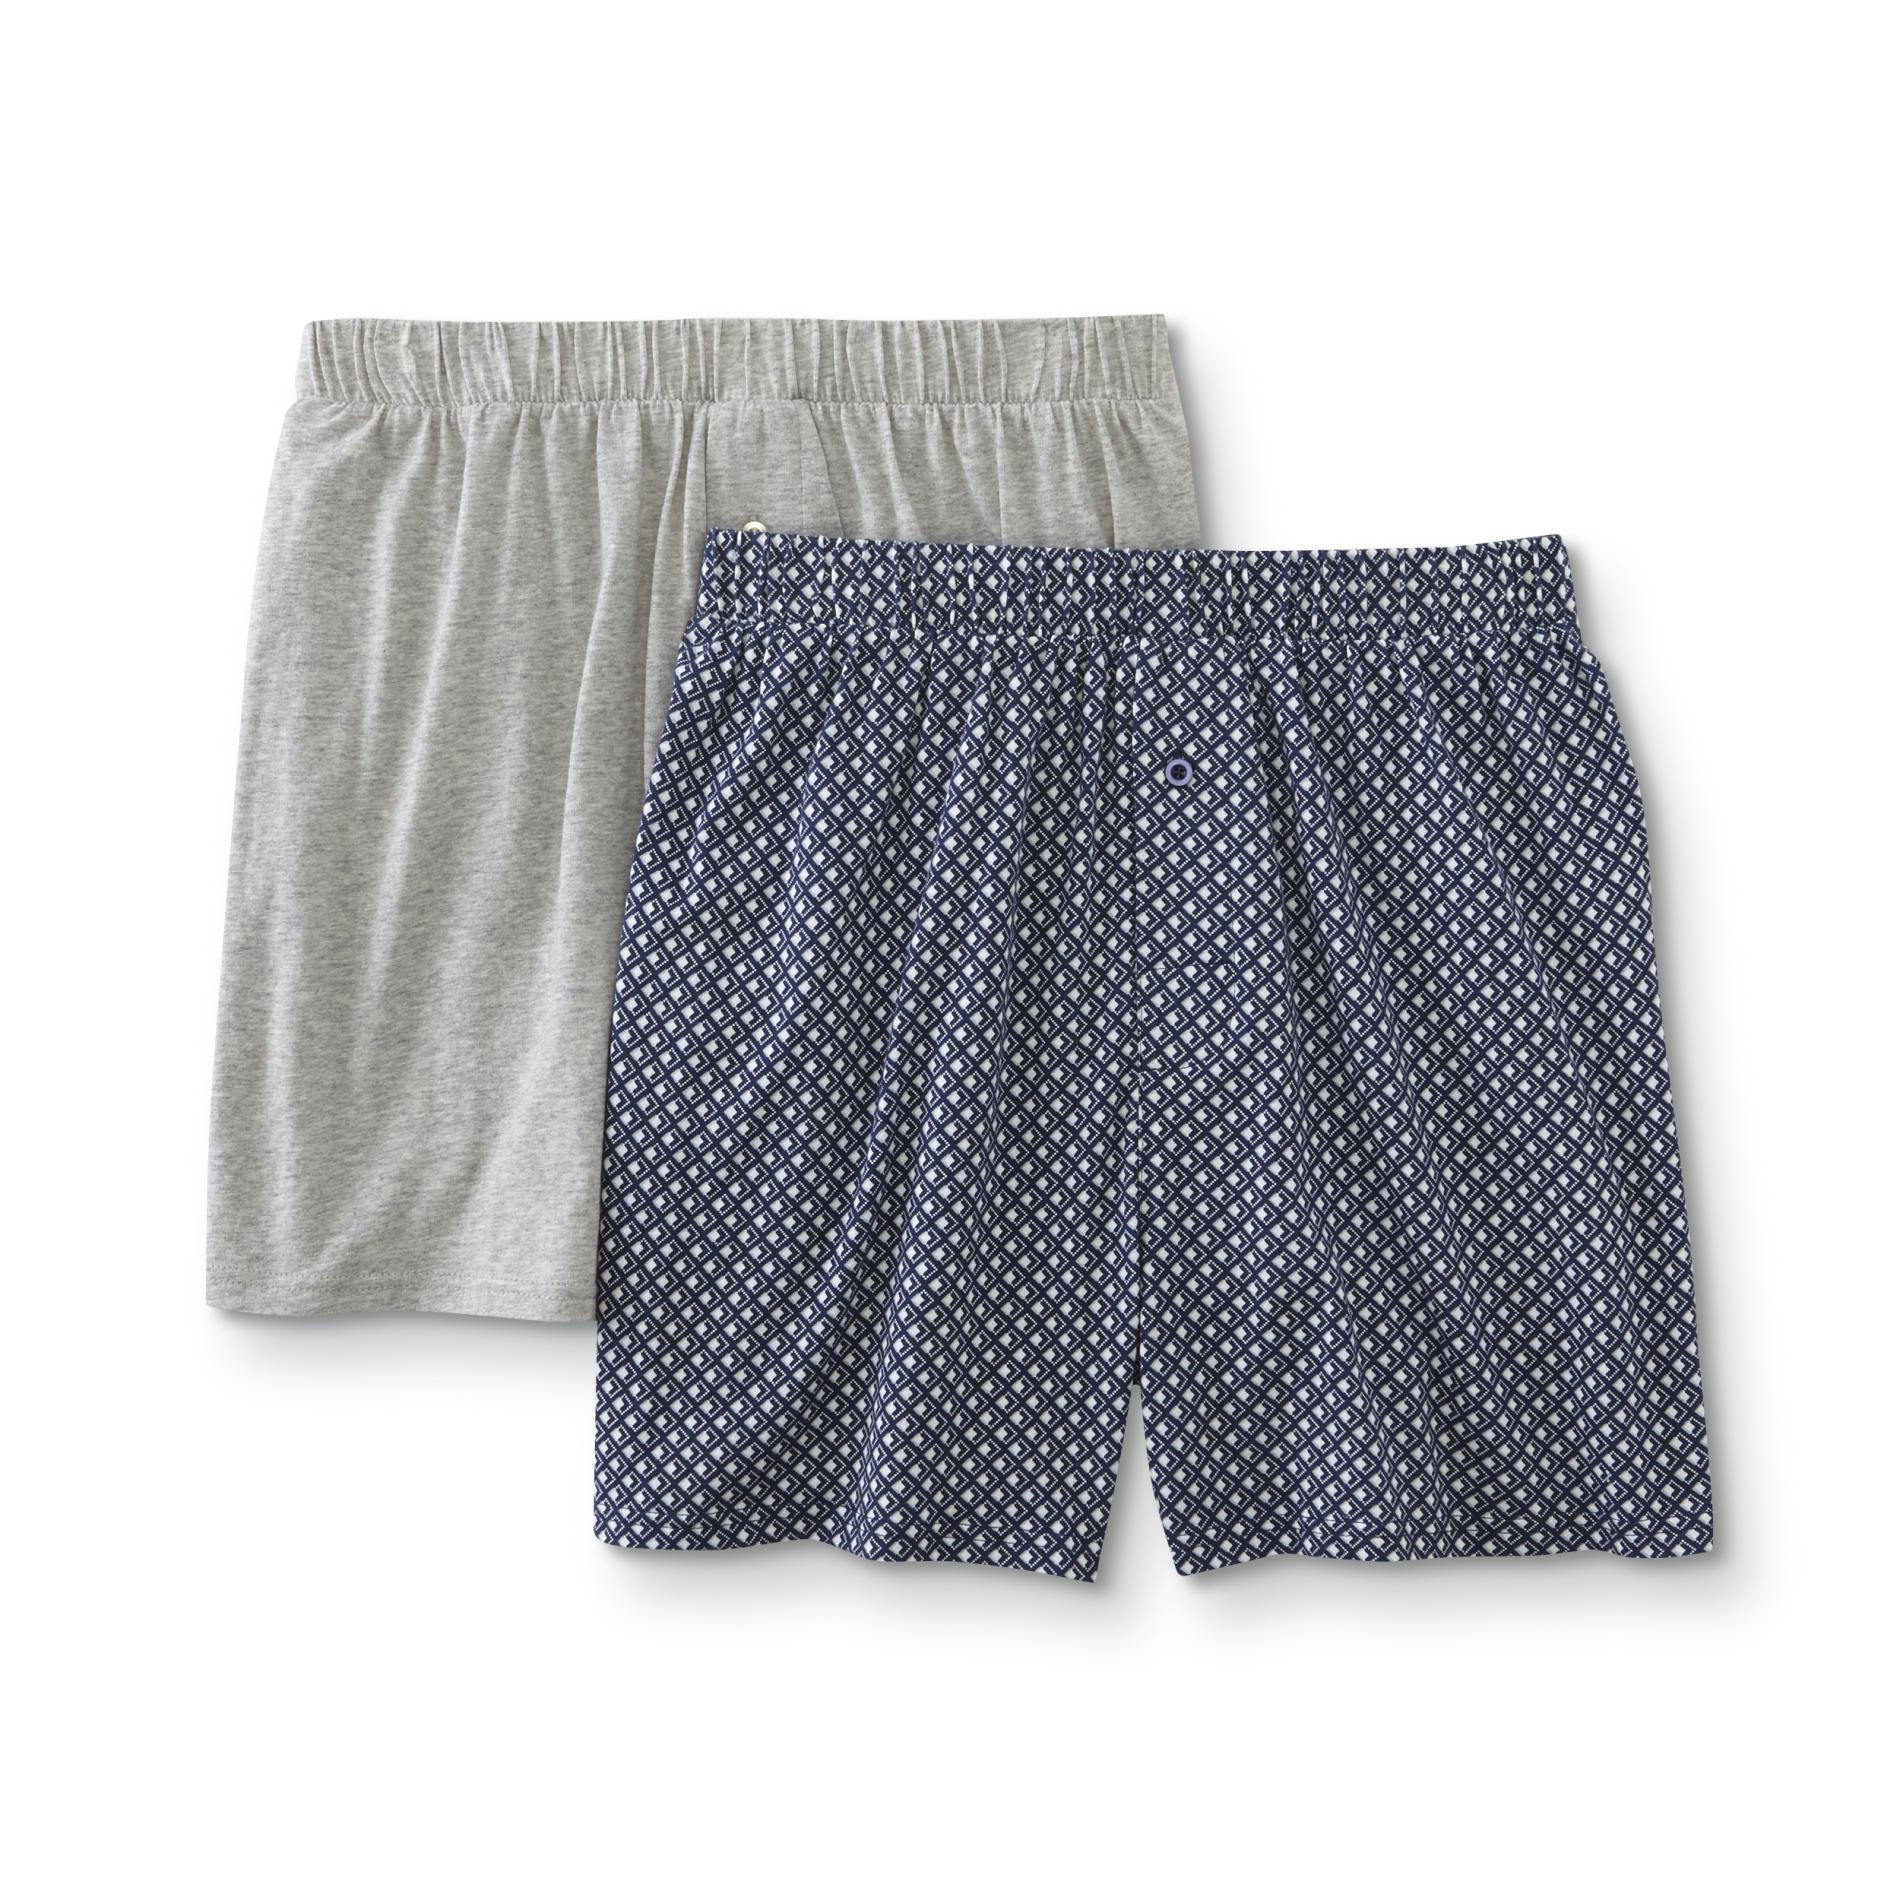 Simply Styled Men's 2-Pack Knit Boxer Shorts - Geometric